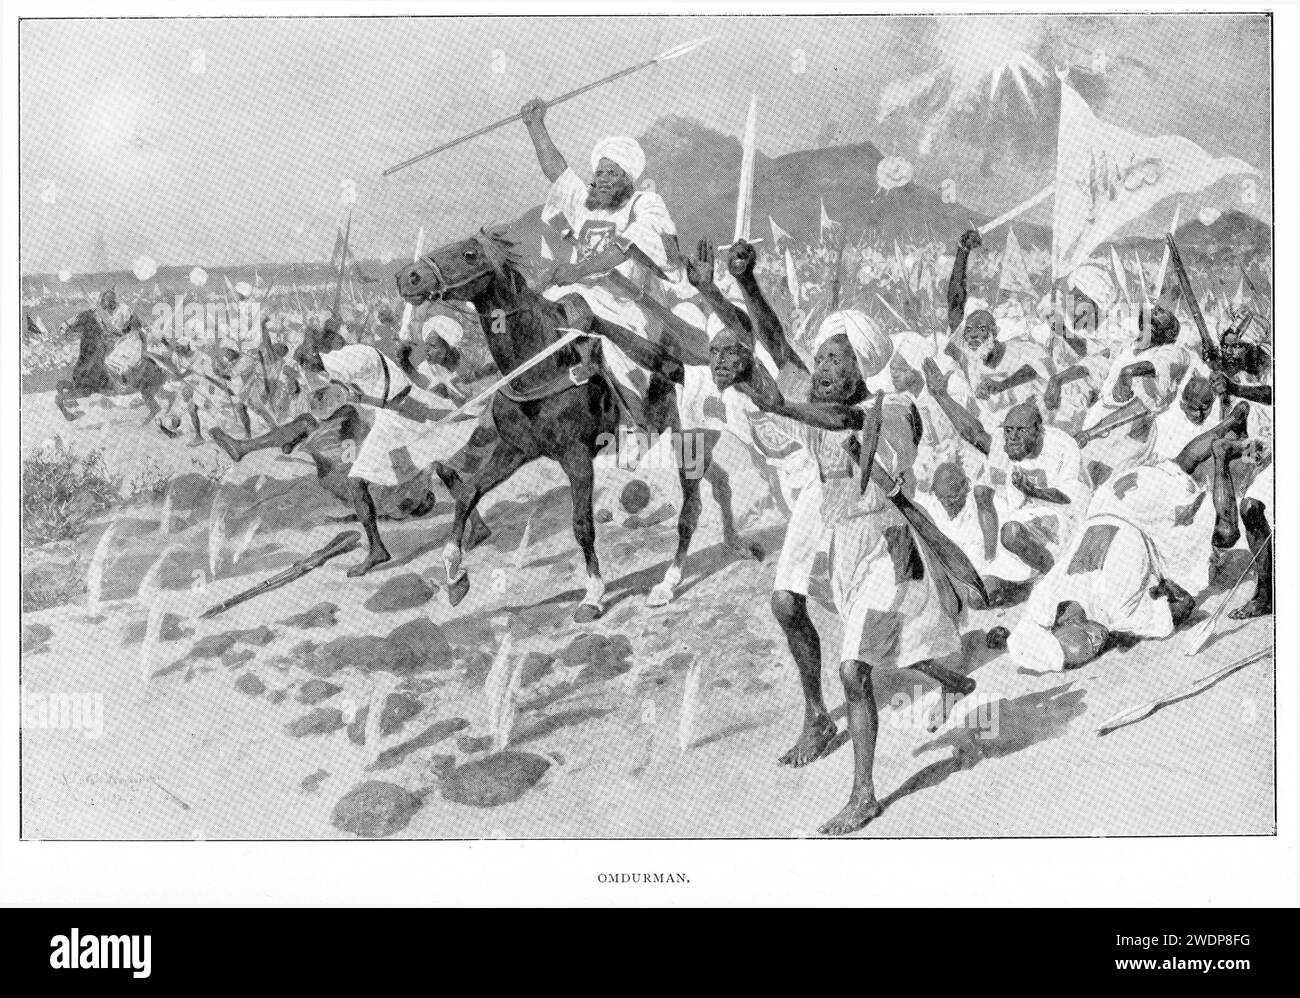 The Battle of Omdurman was fought during the Anglo-Egyptian conquest of Sudan between a British–Egyptian expeditionary force commanded by British Commander-in-Chief (sirdar) major general Horatio Herbert Kitchener and a Sudanese army of the Mahdist State, led by Abdallahi ibn Muhammad (the Khalifa), the successor to the self-proclaimed Mahdi, Muhammad Ahmad. The battle took place on 2 September 1898, at Kerreri, 11 kilometres (6.8 mi) north of Omdurman. Stock Photo